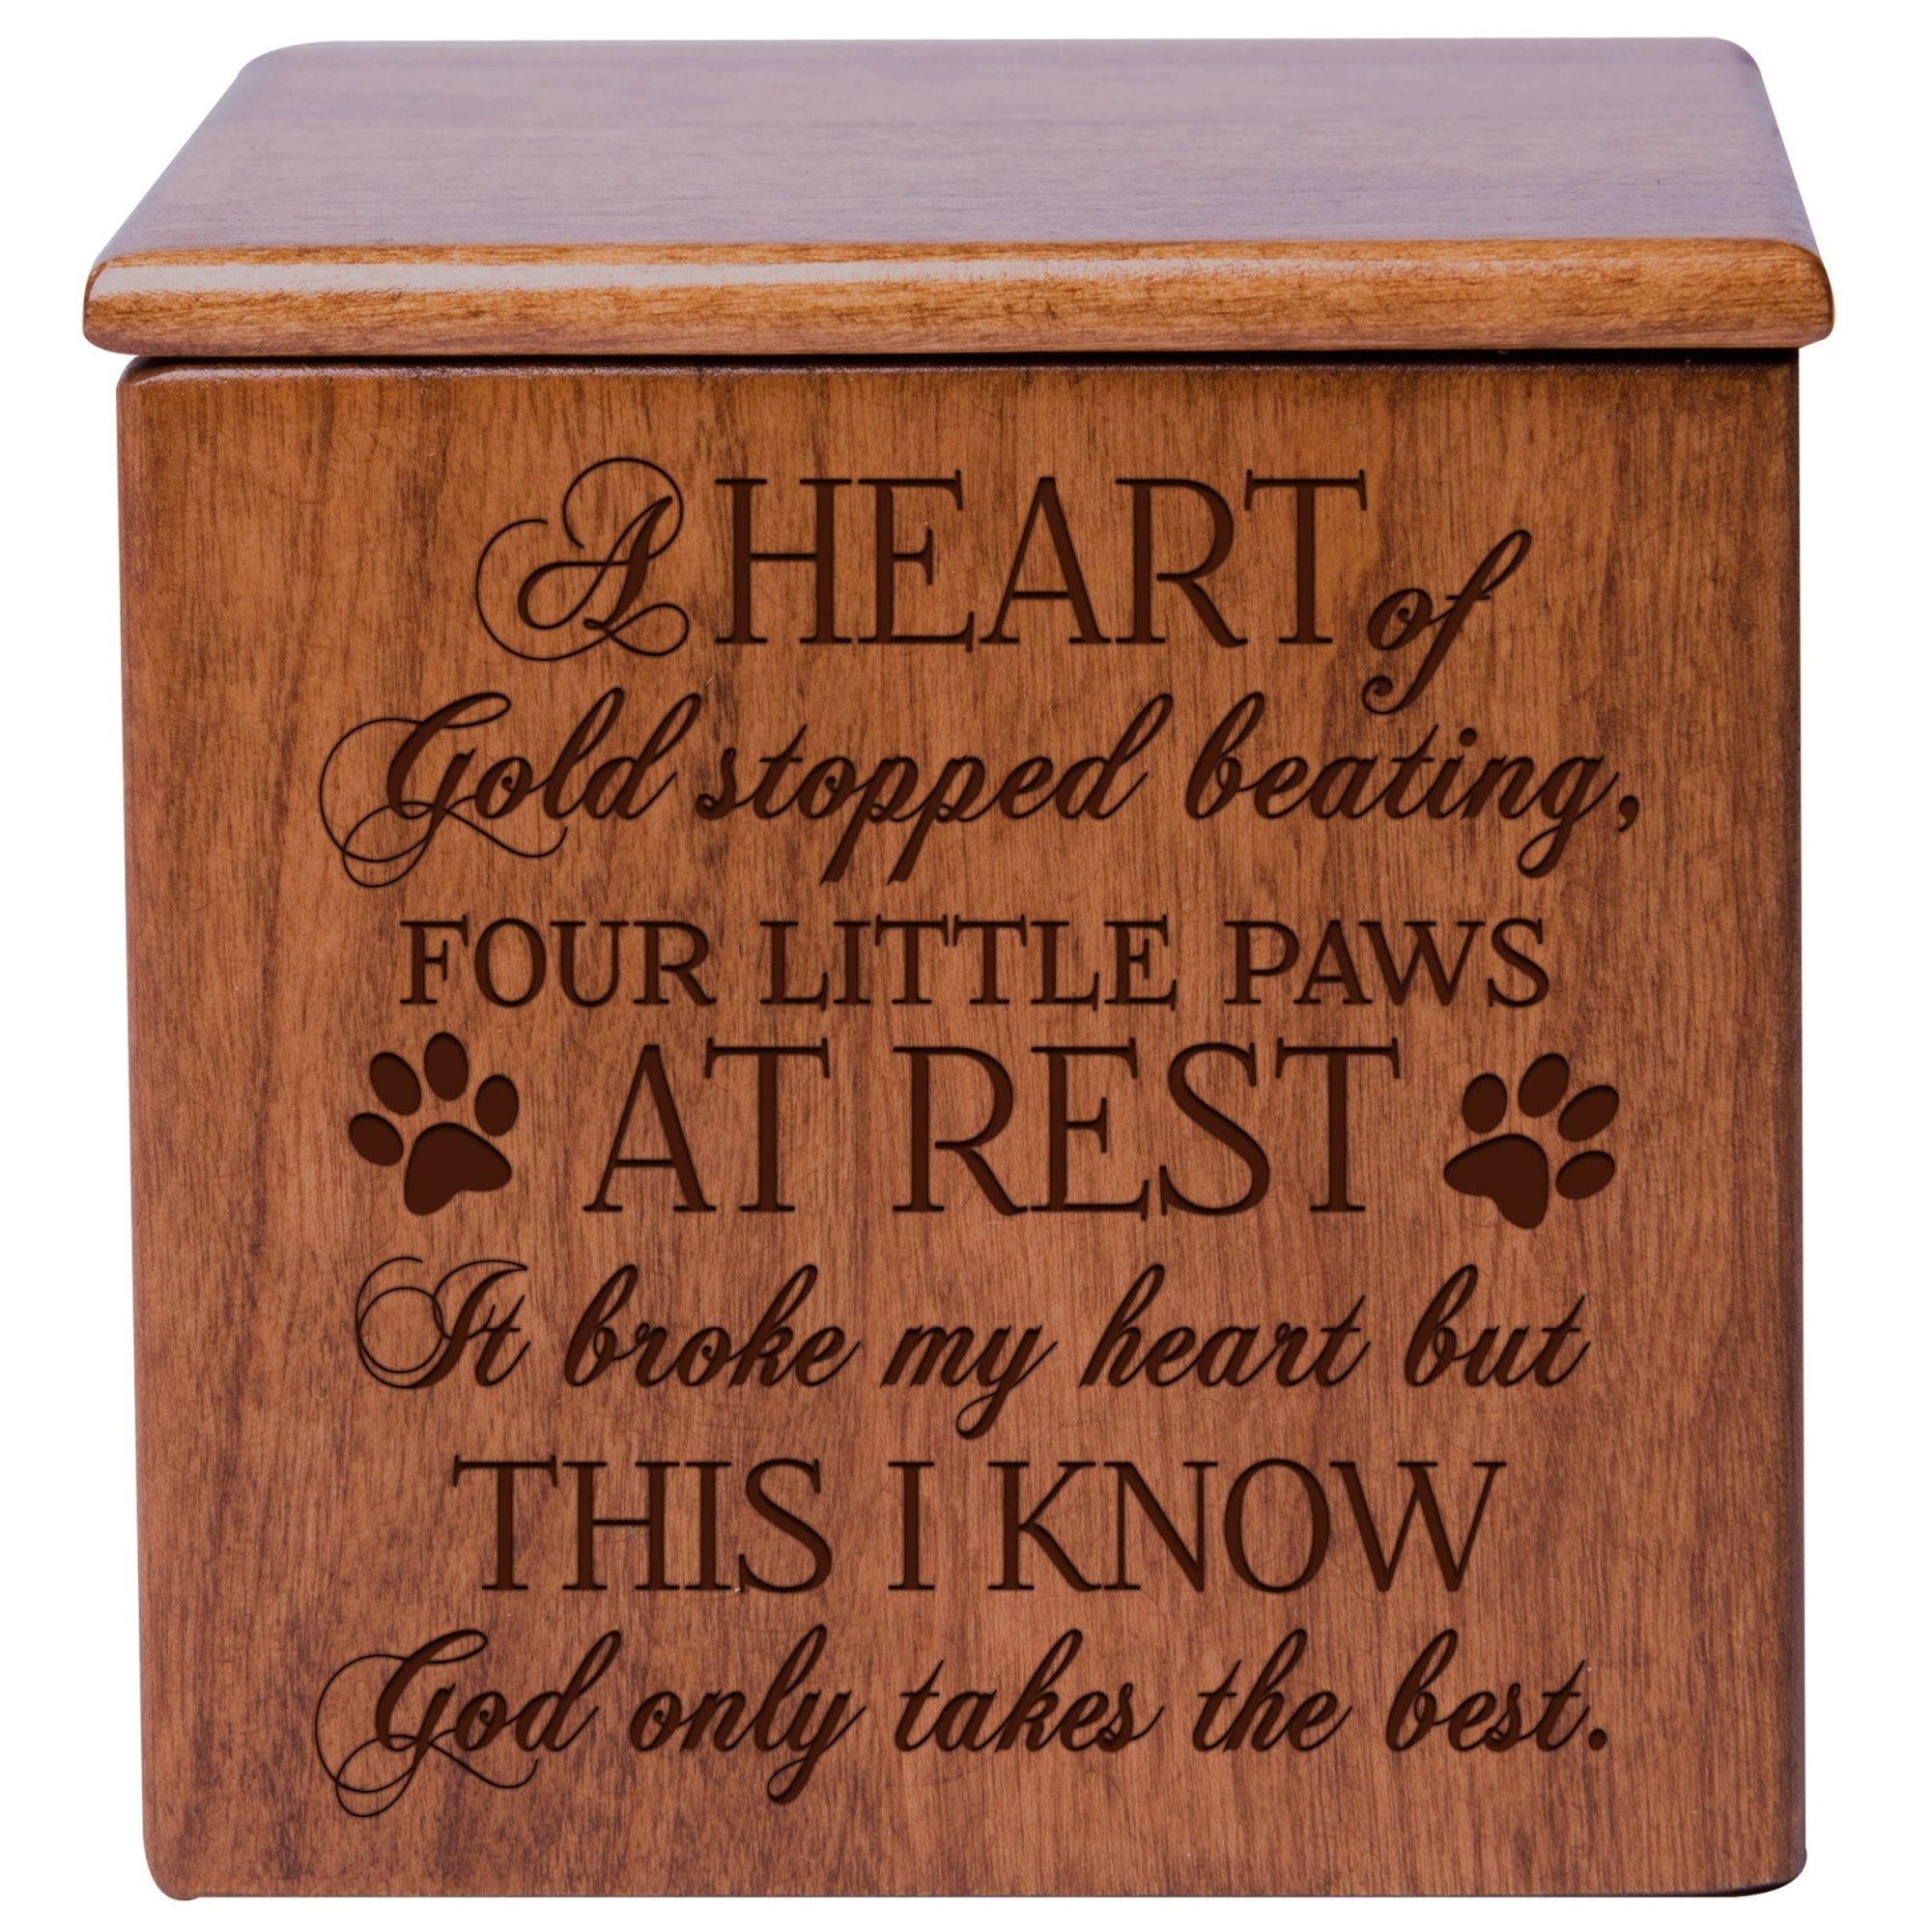 Pet Memorial Keepsake Cremation Urn Box for Dog or Cat - A Heart of Gold - LifeSong Milestones